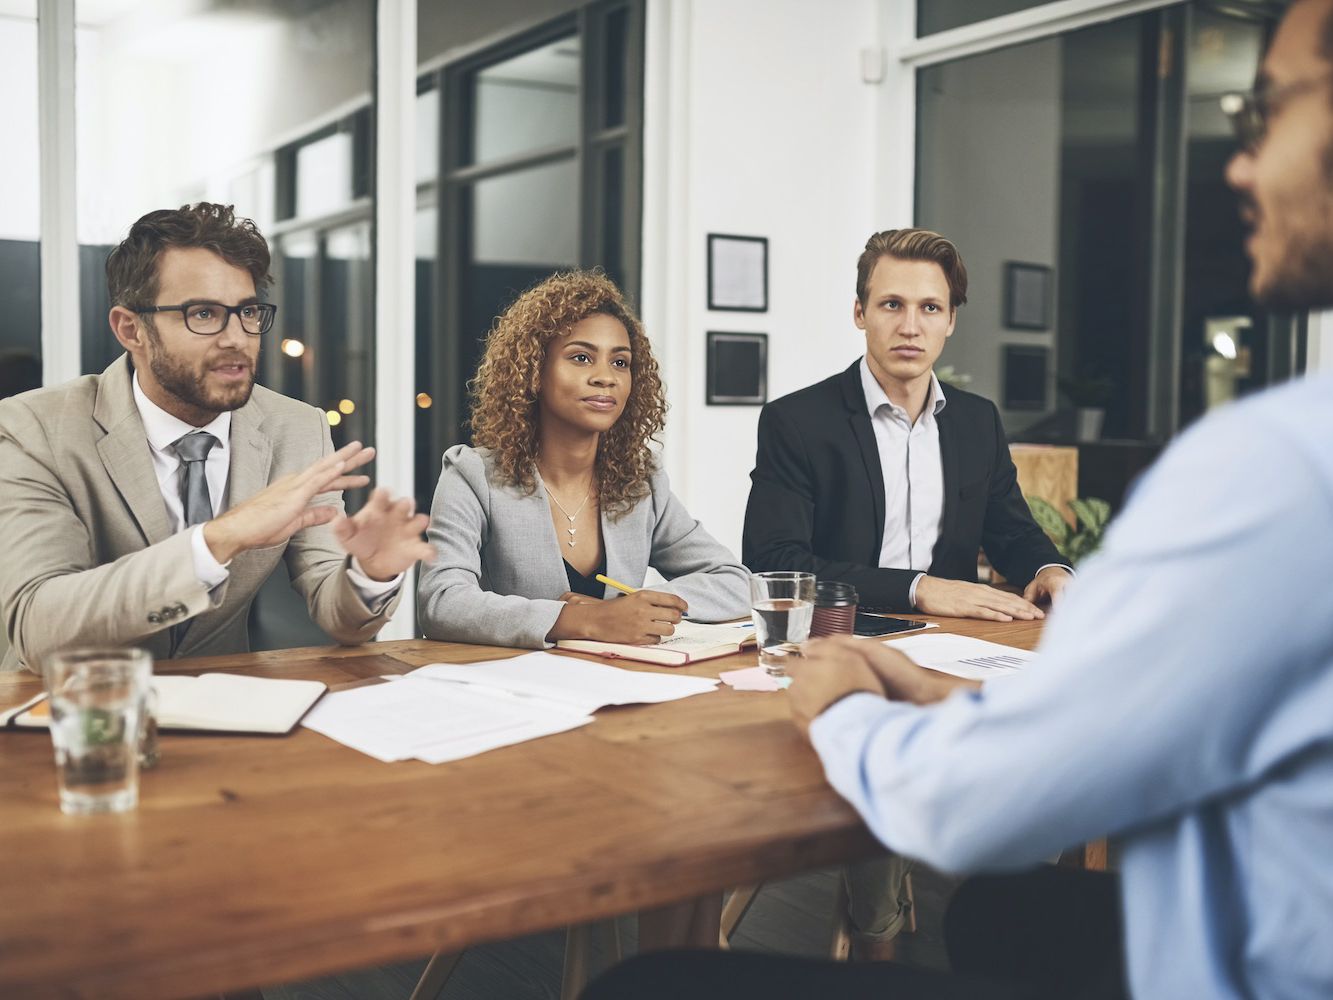 Make You Stand Out in Group Interview